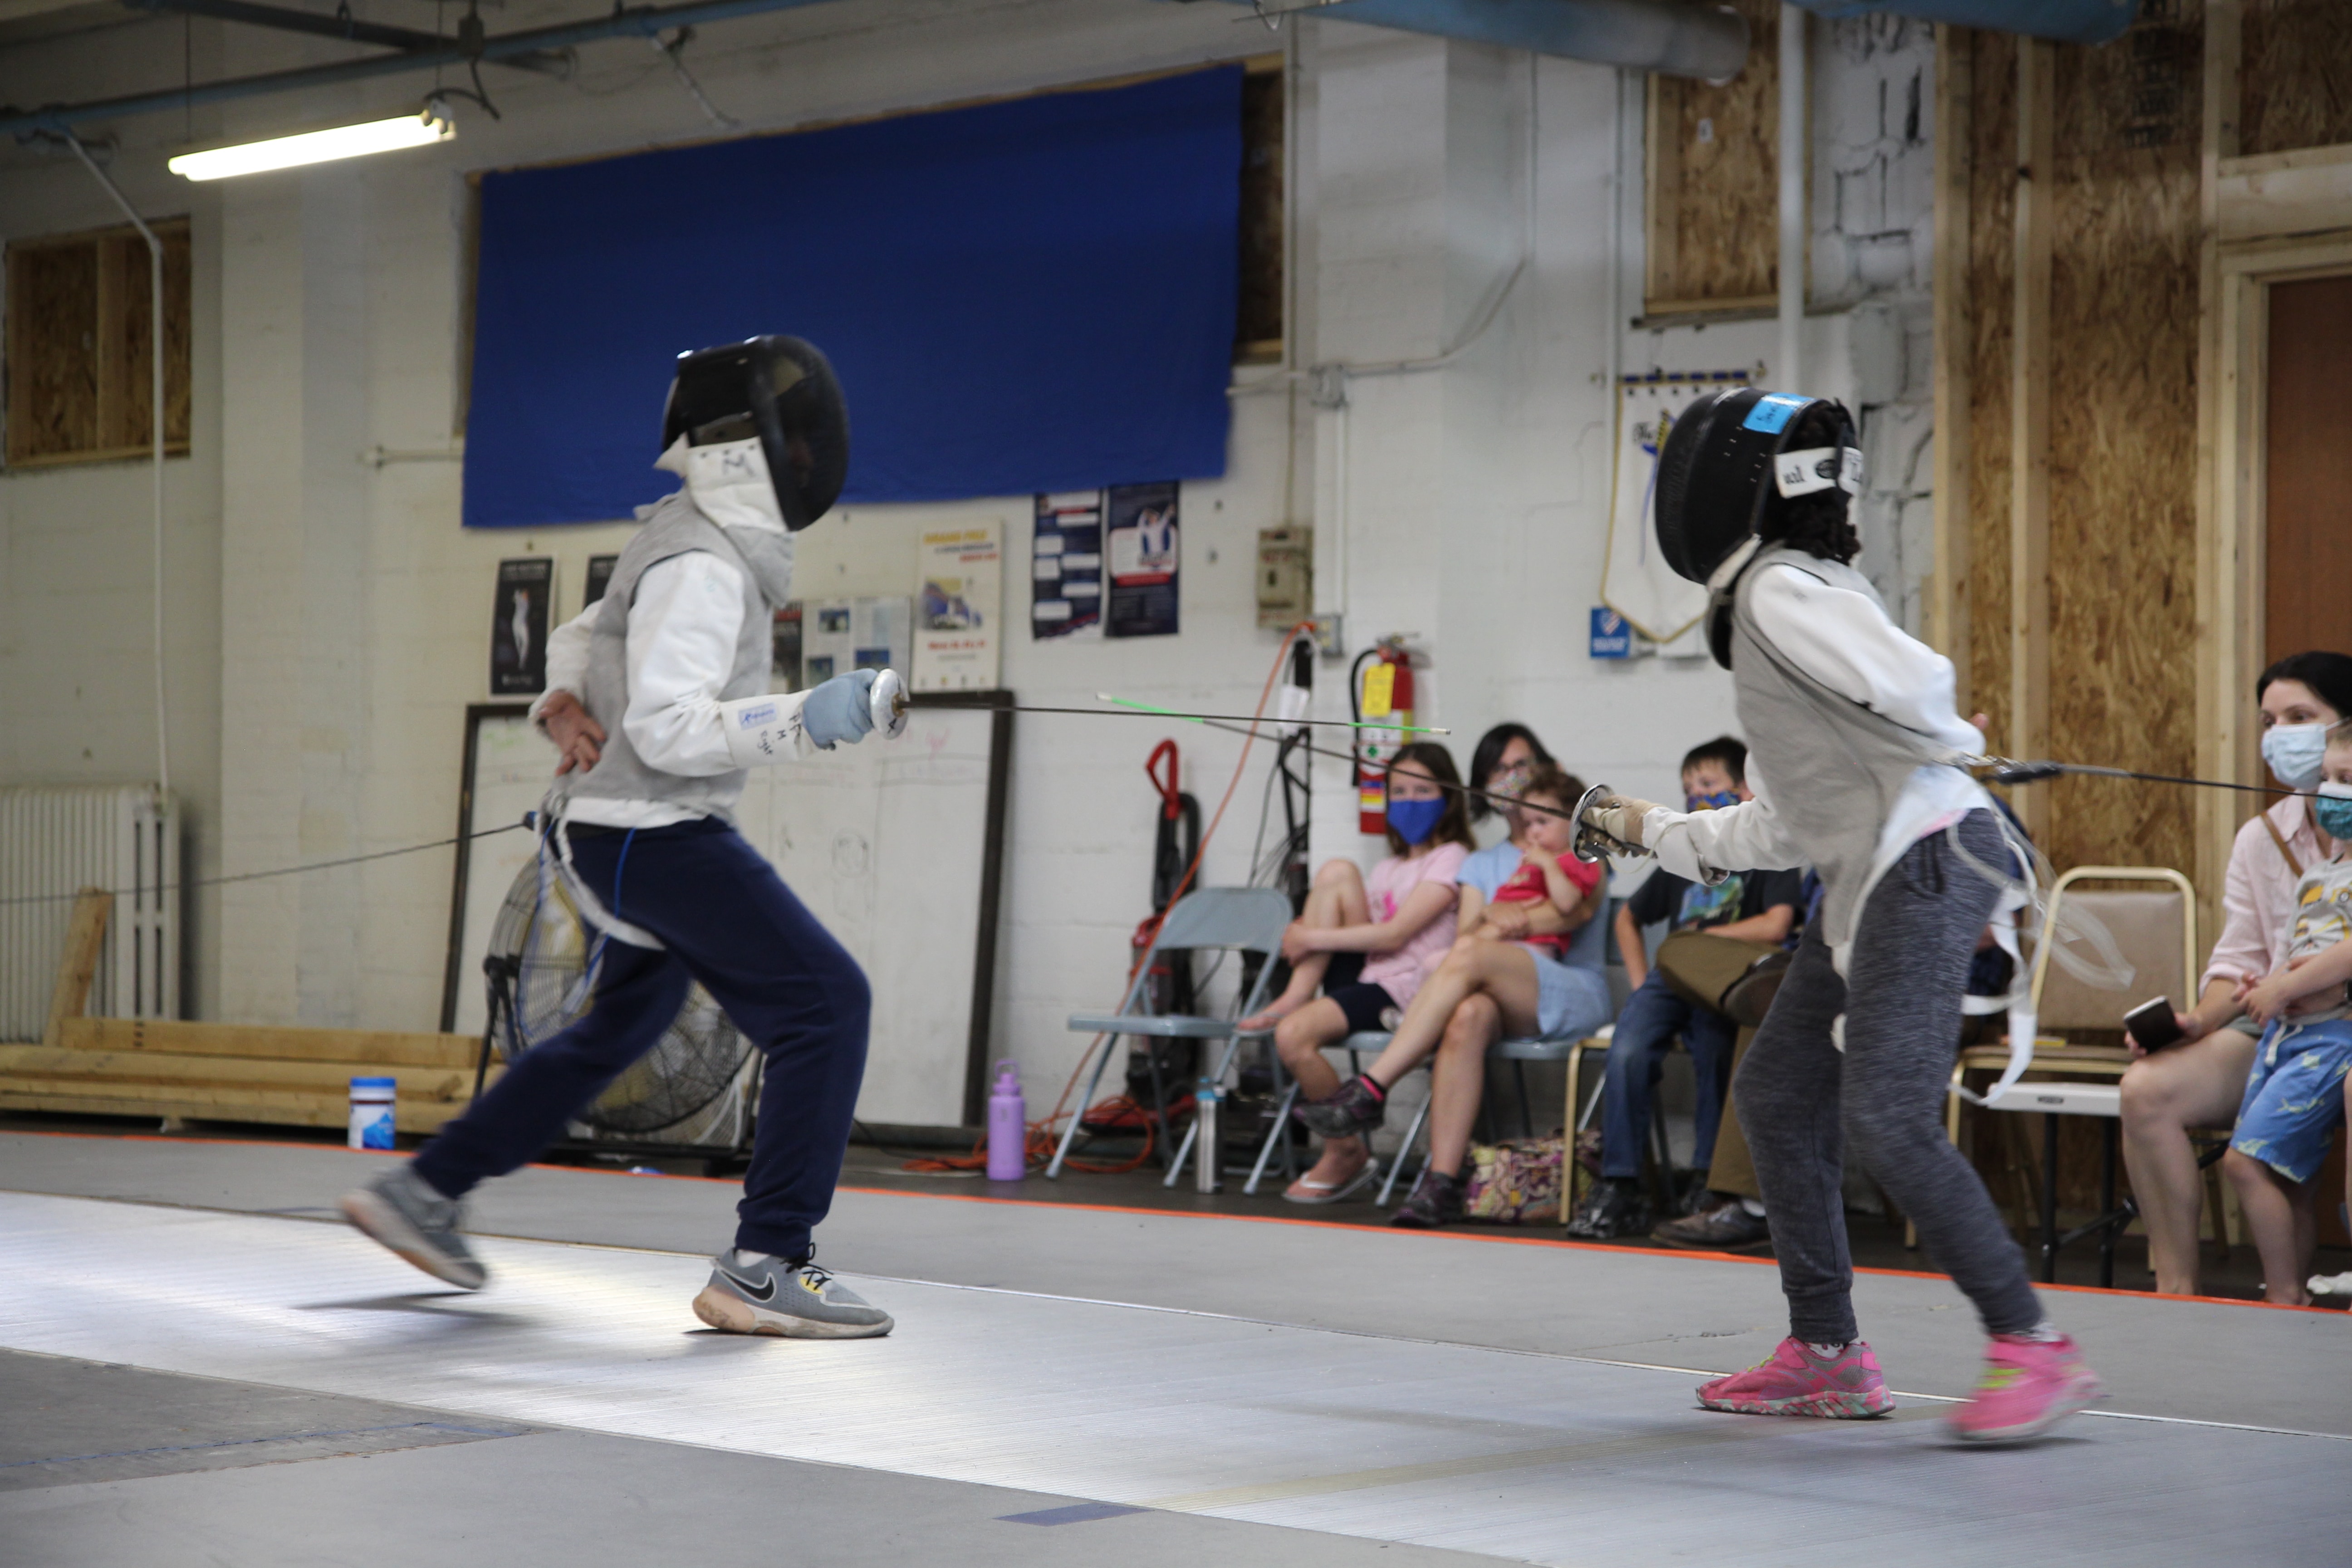 Demonstration of a fencing match